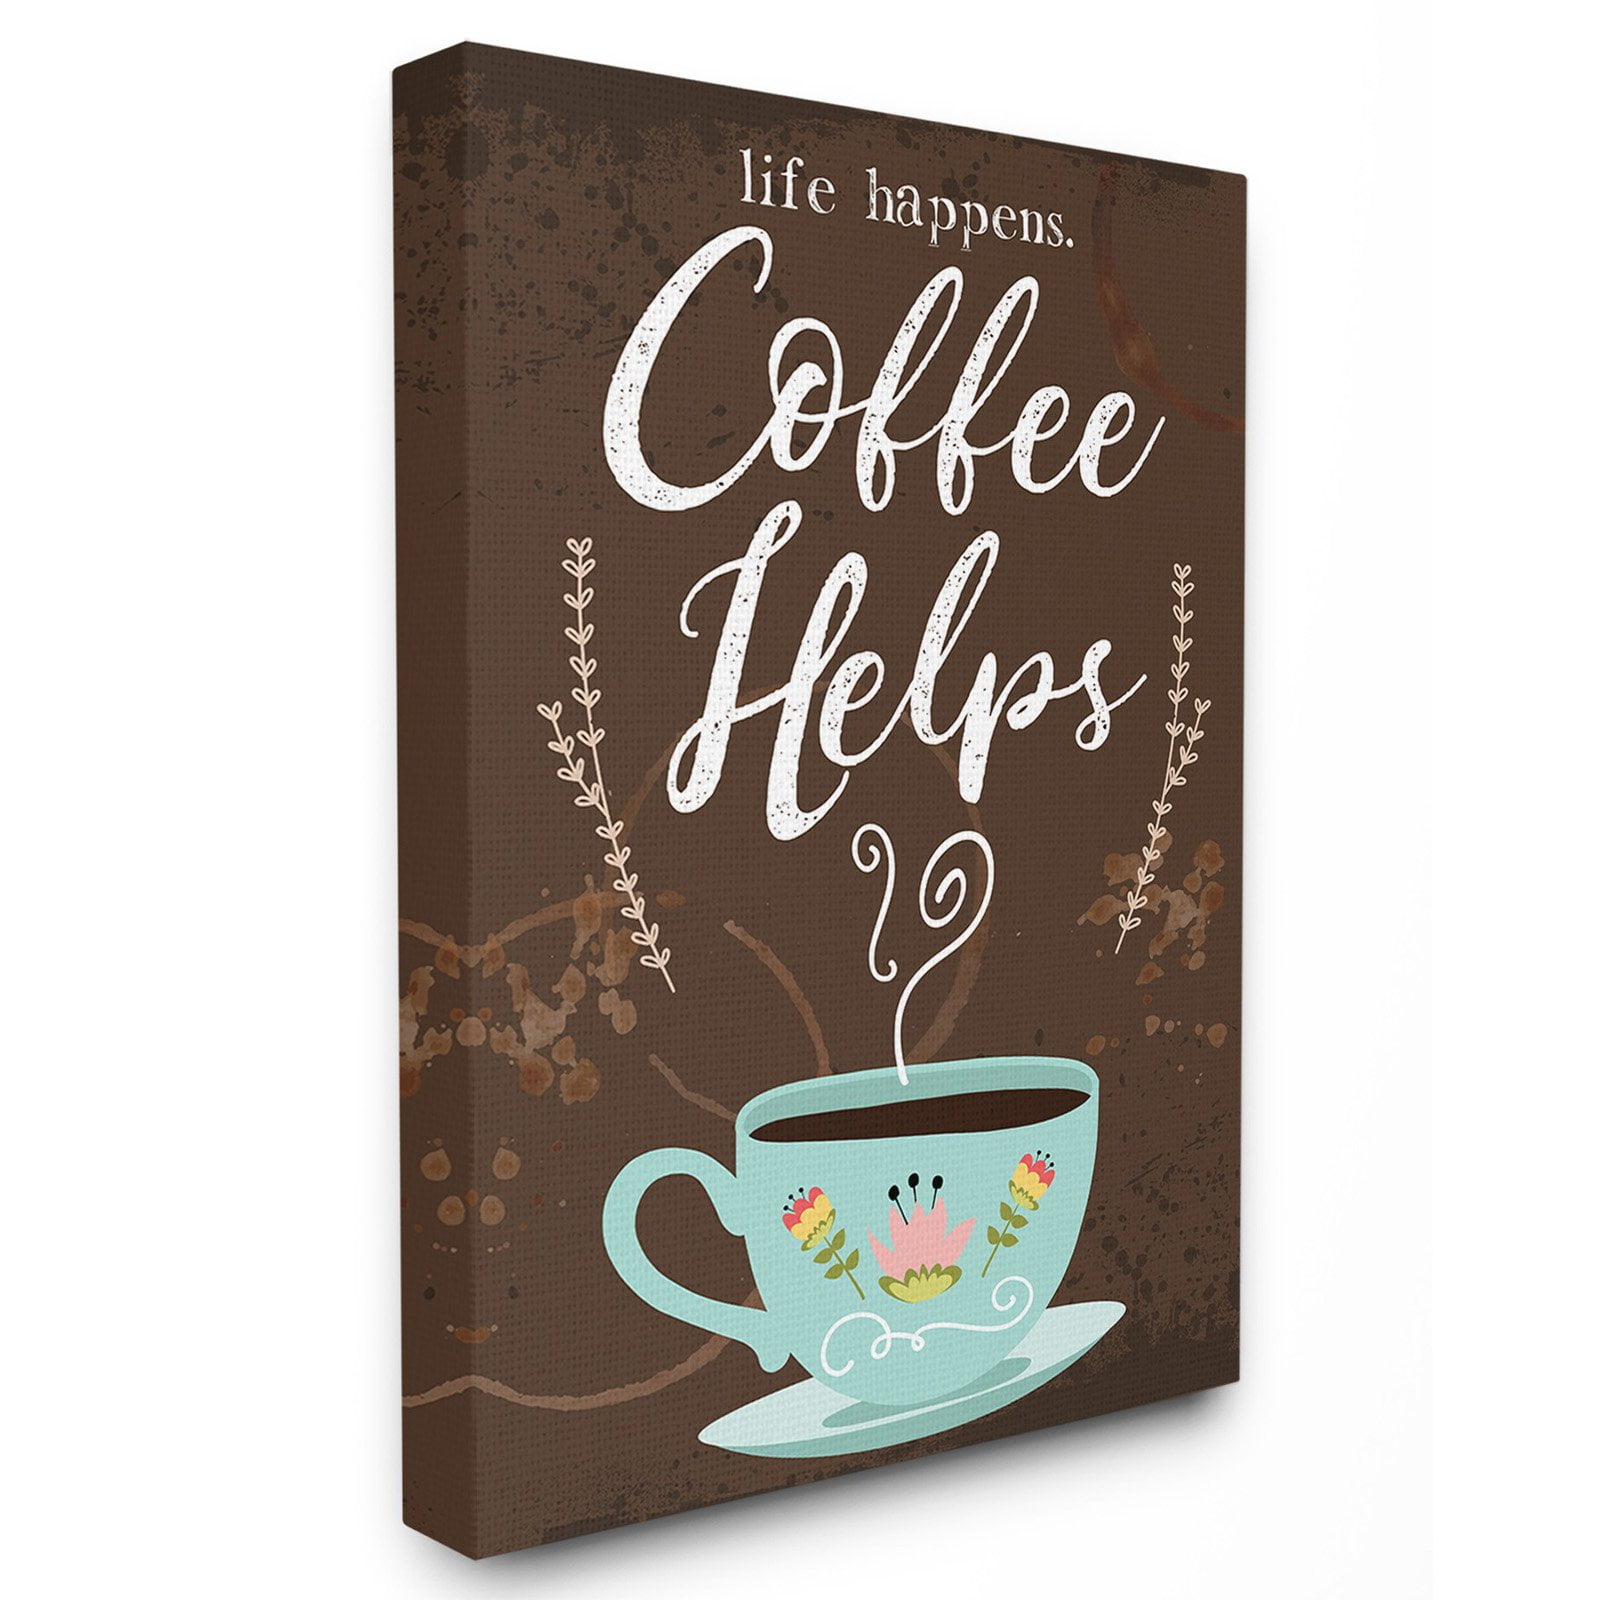 Happens Cup Look Decor Stupell Home Coffee Helps The Wall Life Collection Art Chalkboard